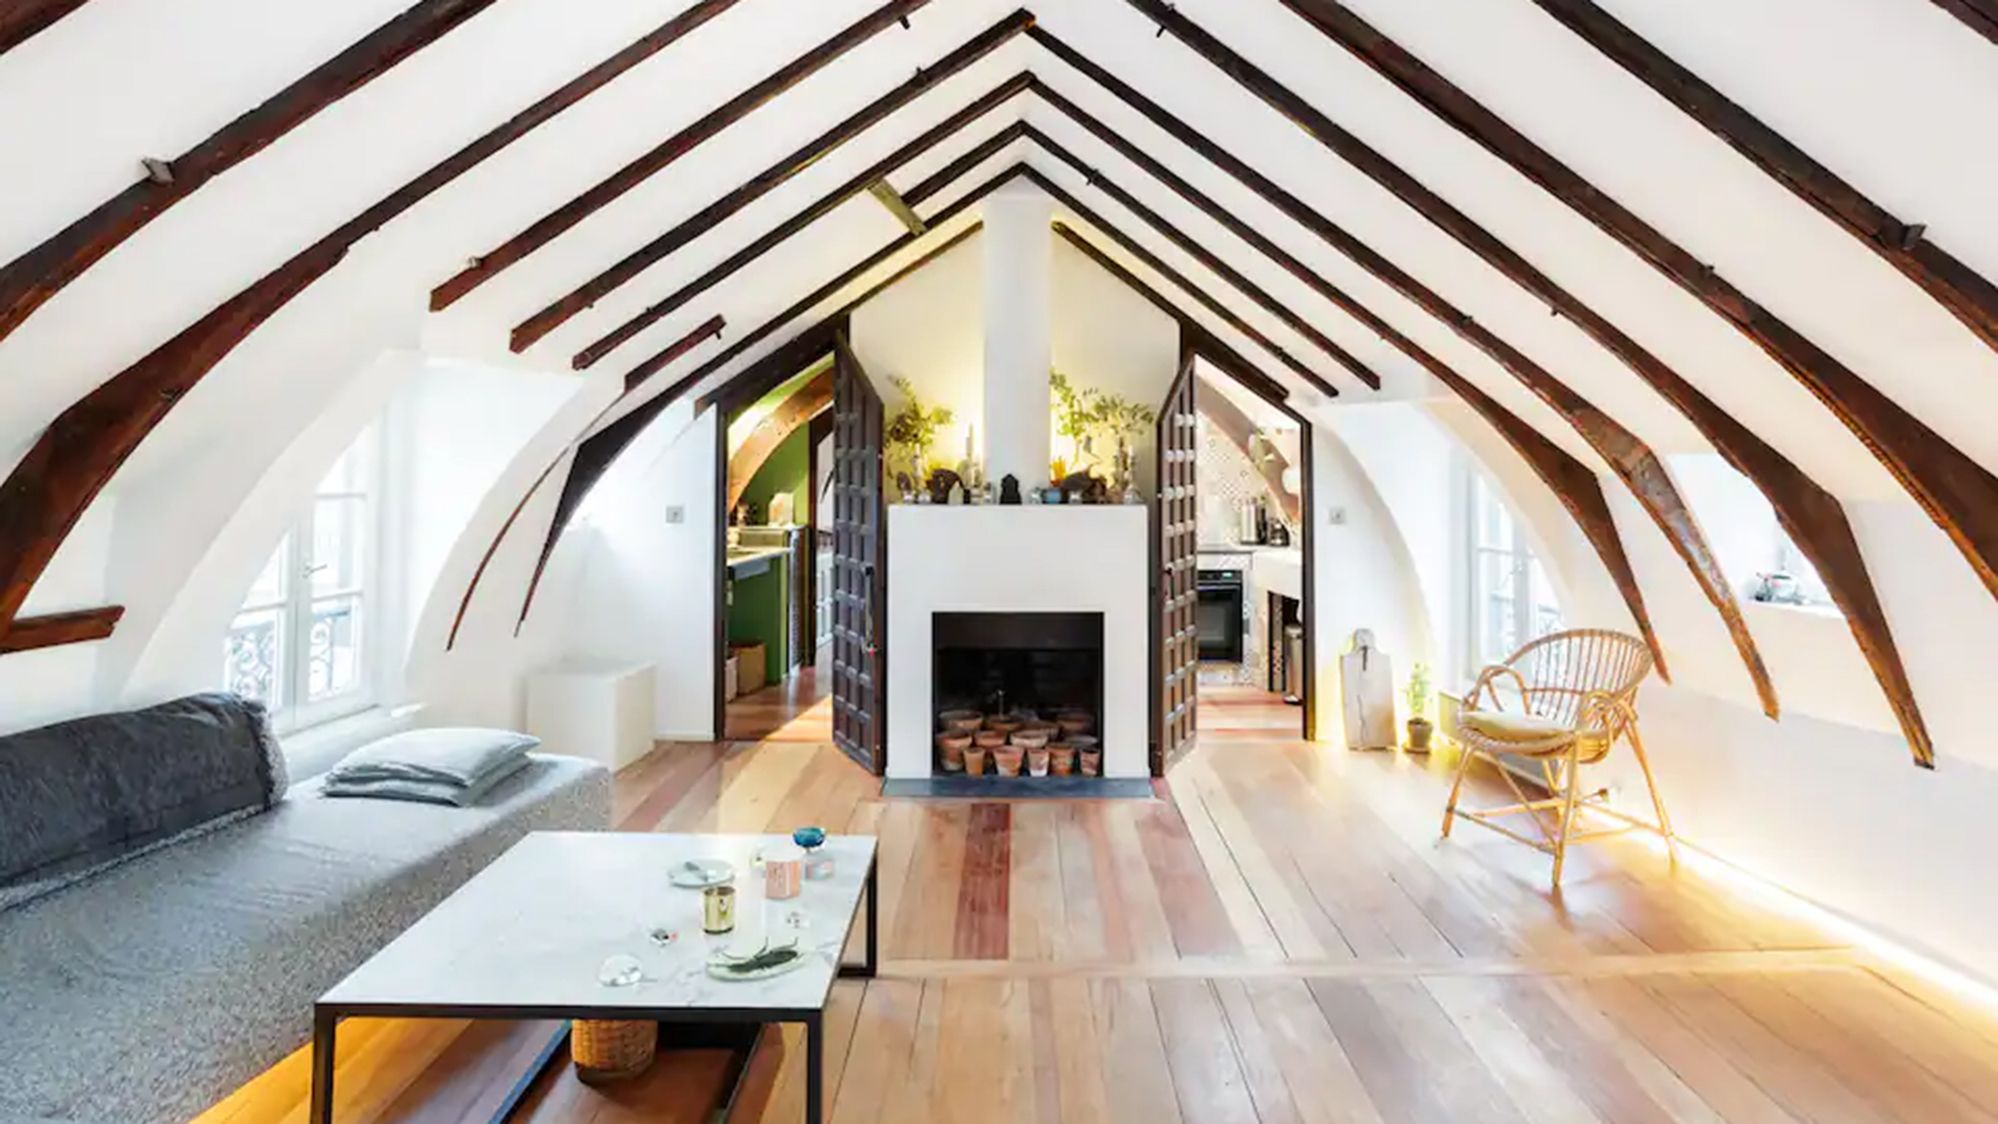 The hottest new Airbnbs to rent in 2023